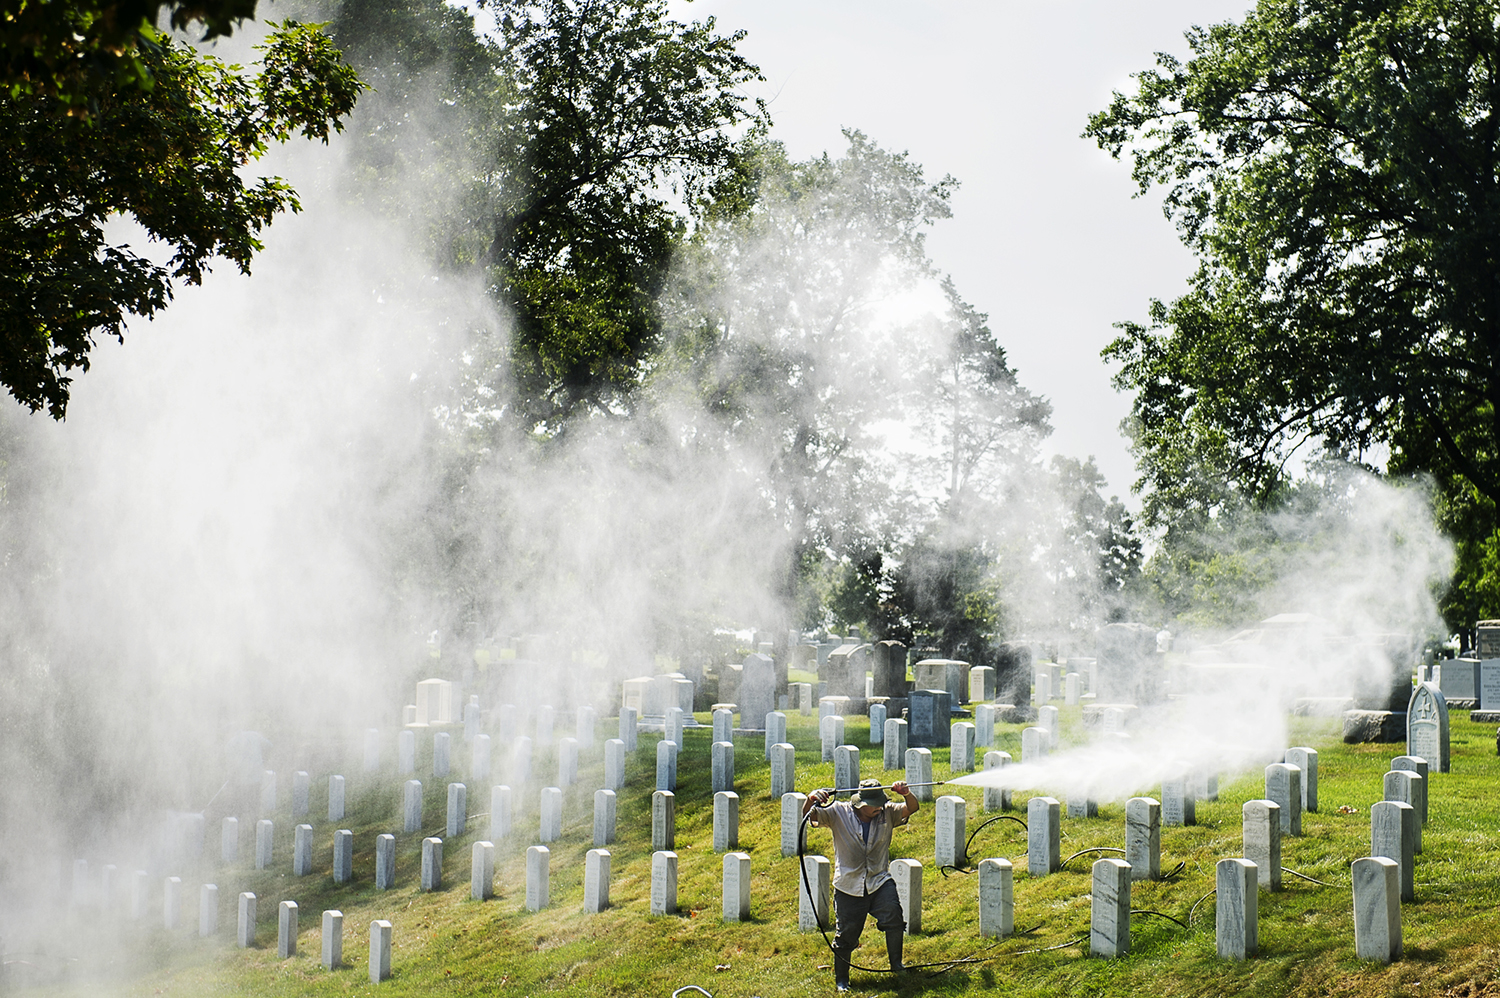 Man in a cemetary sprays large amounts of chemicals